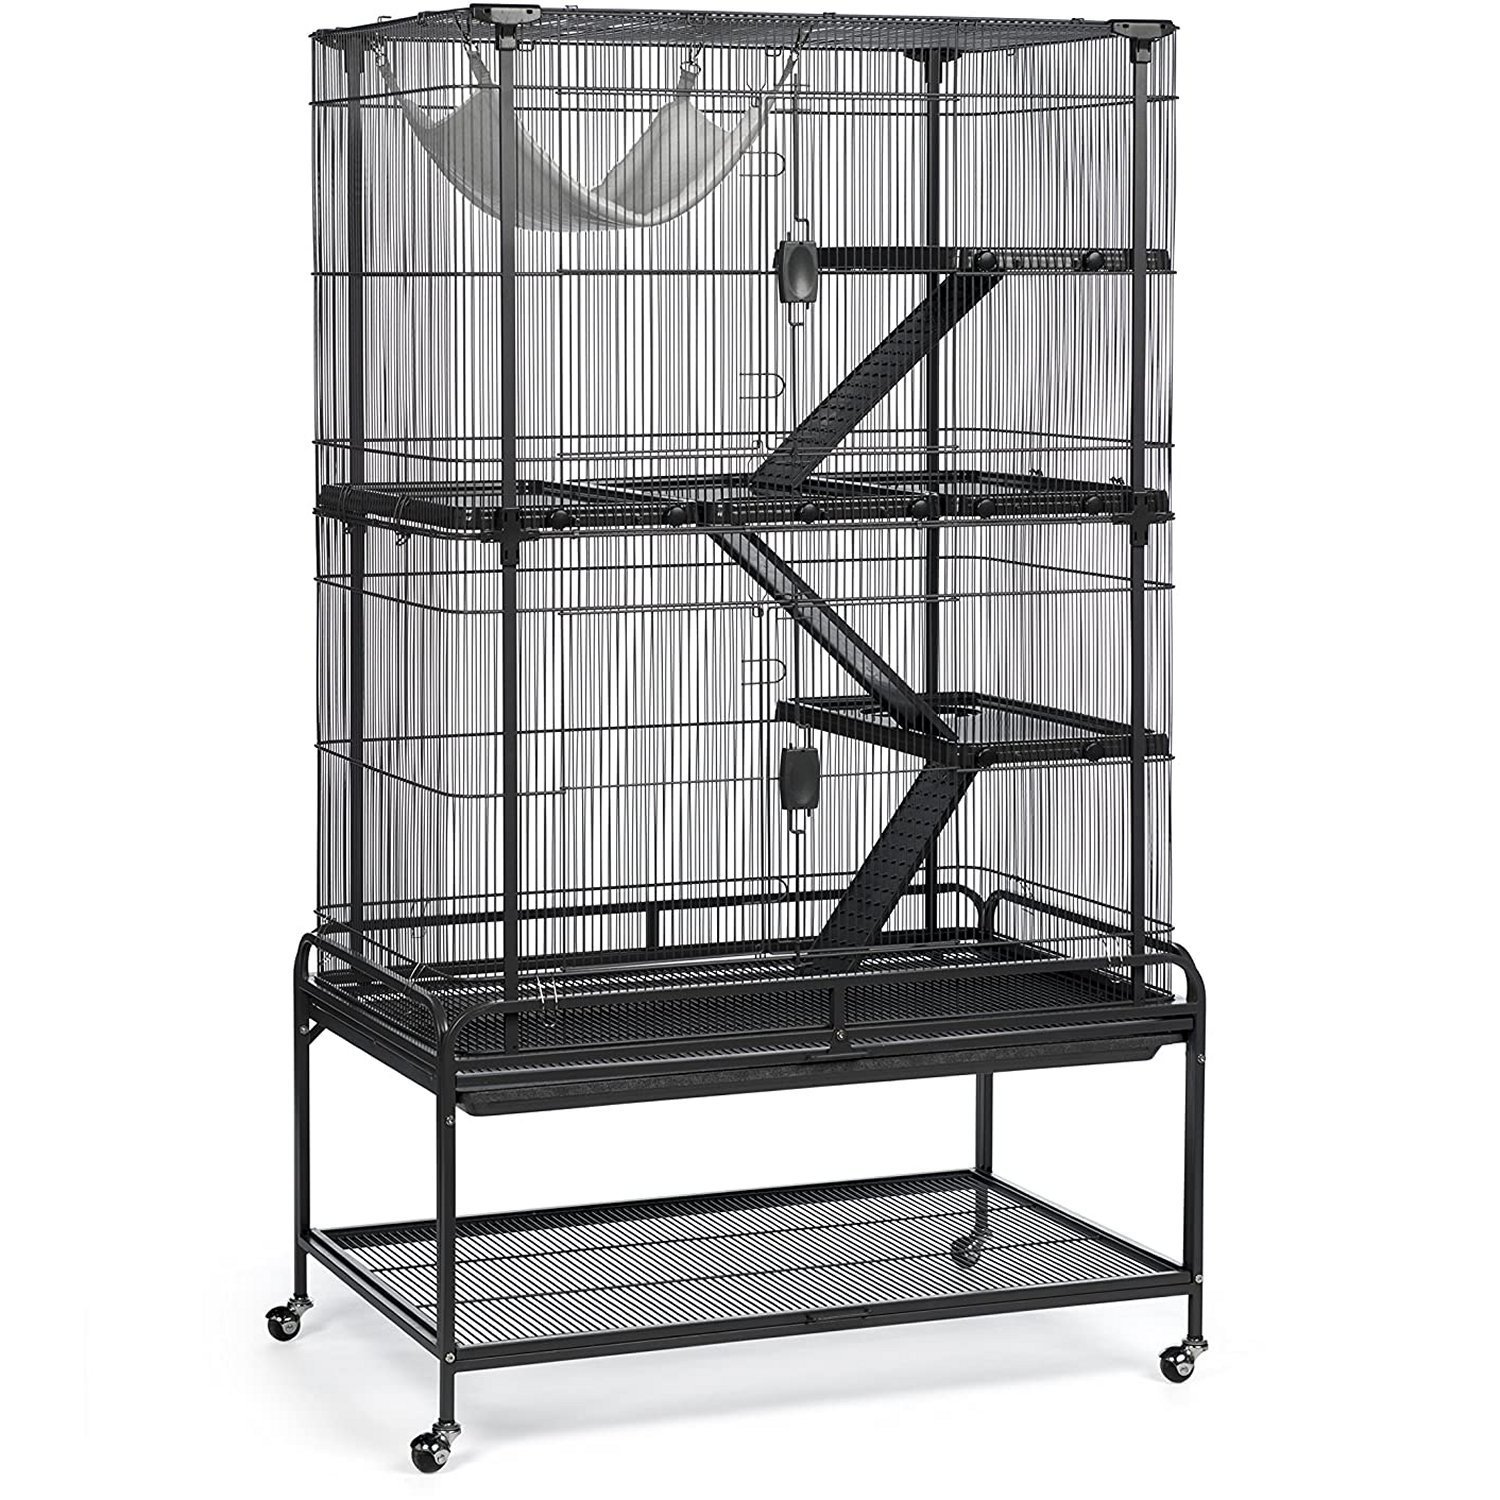 Prevue Pet Products Deluxe Ferret Cage - $2,898.32